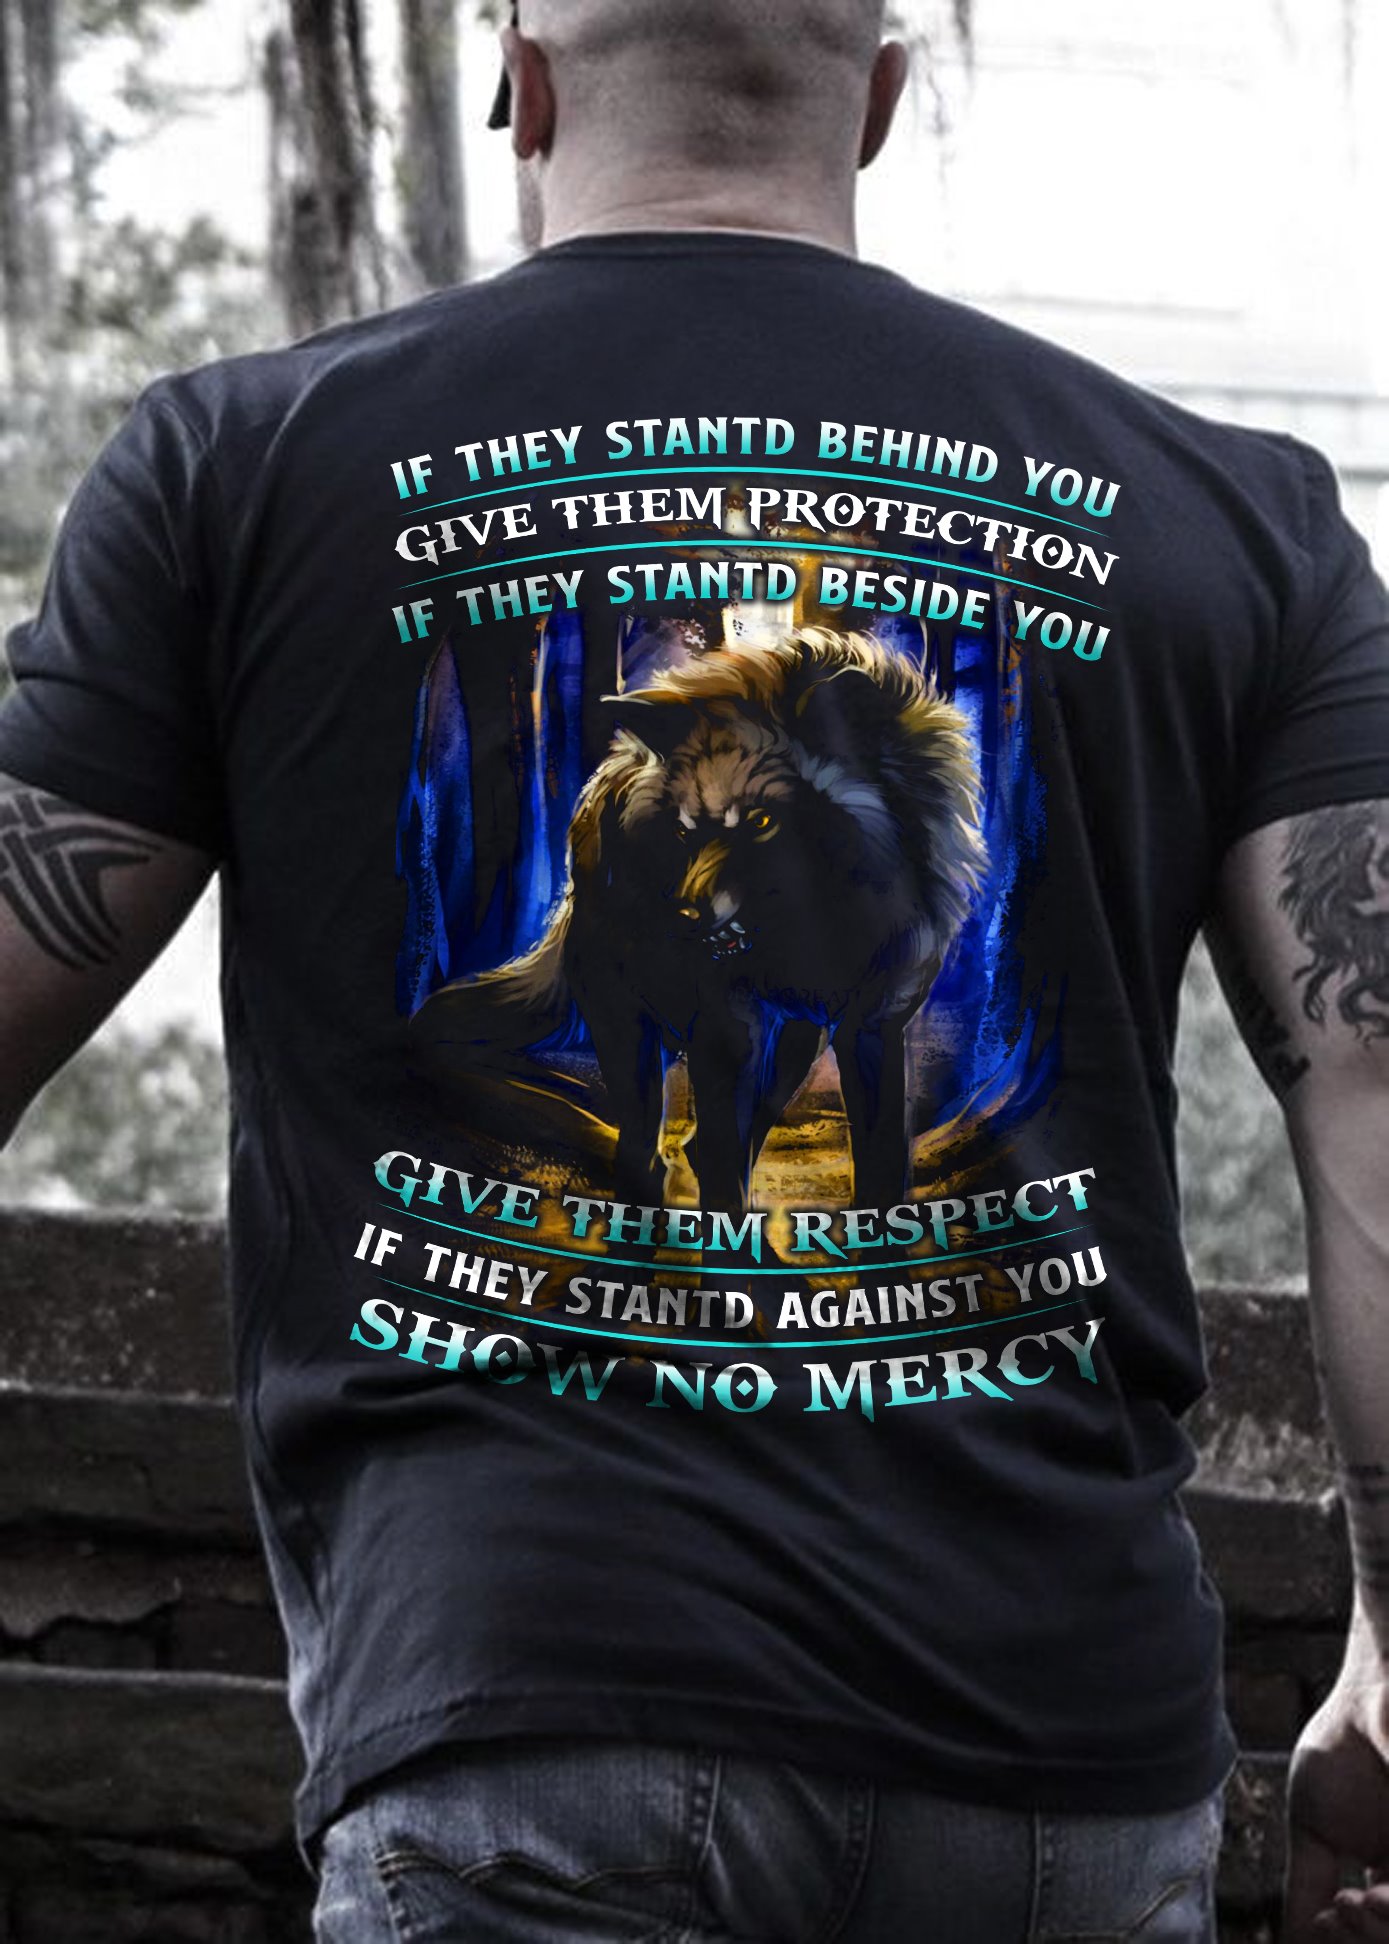 If they stand behind you give them protection - Evil wolf